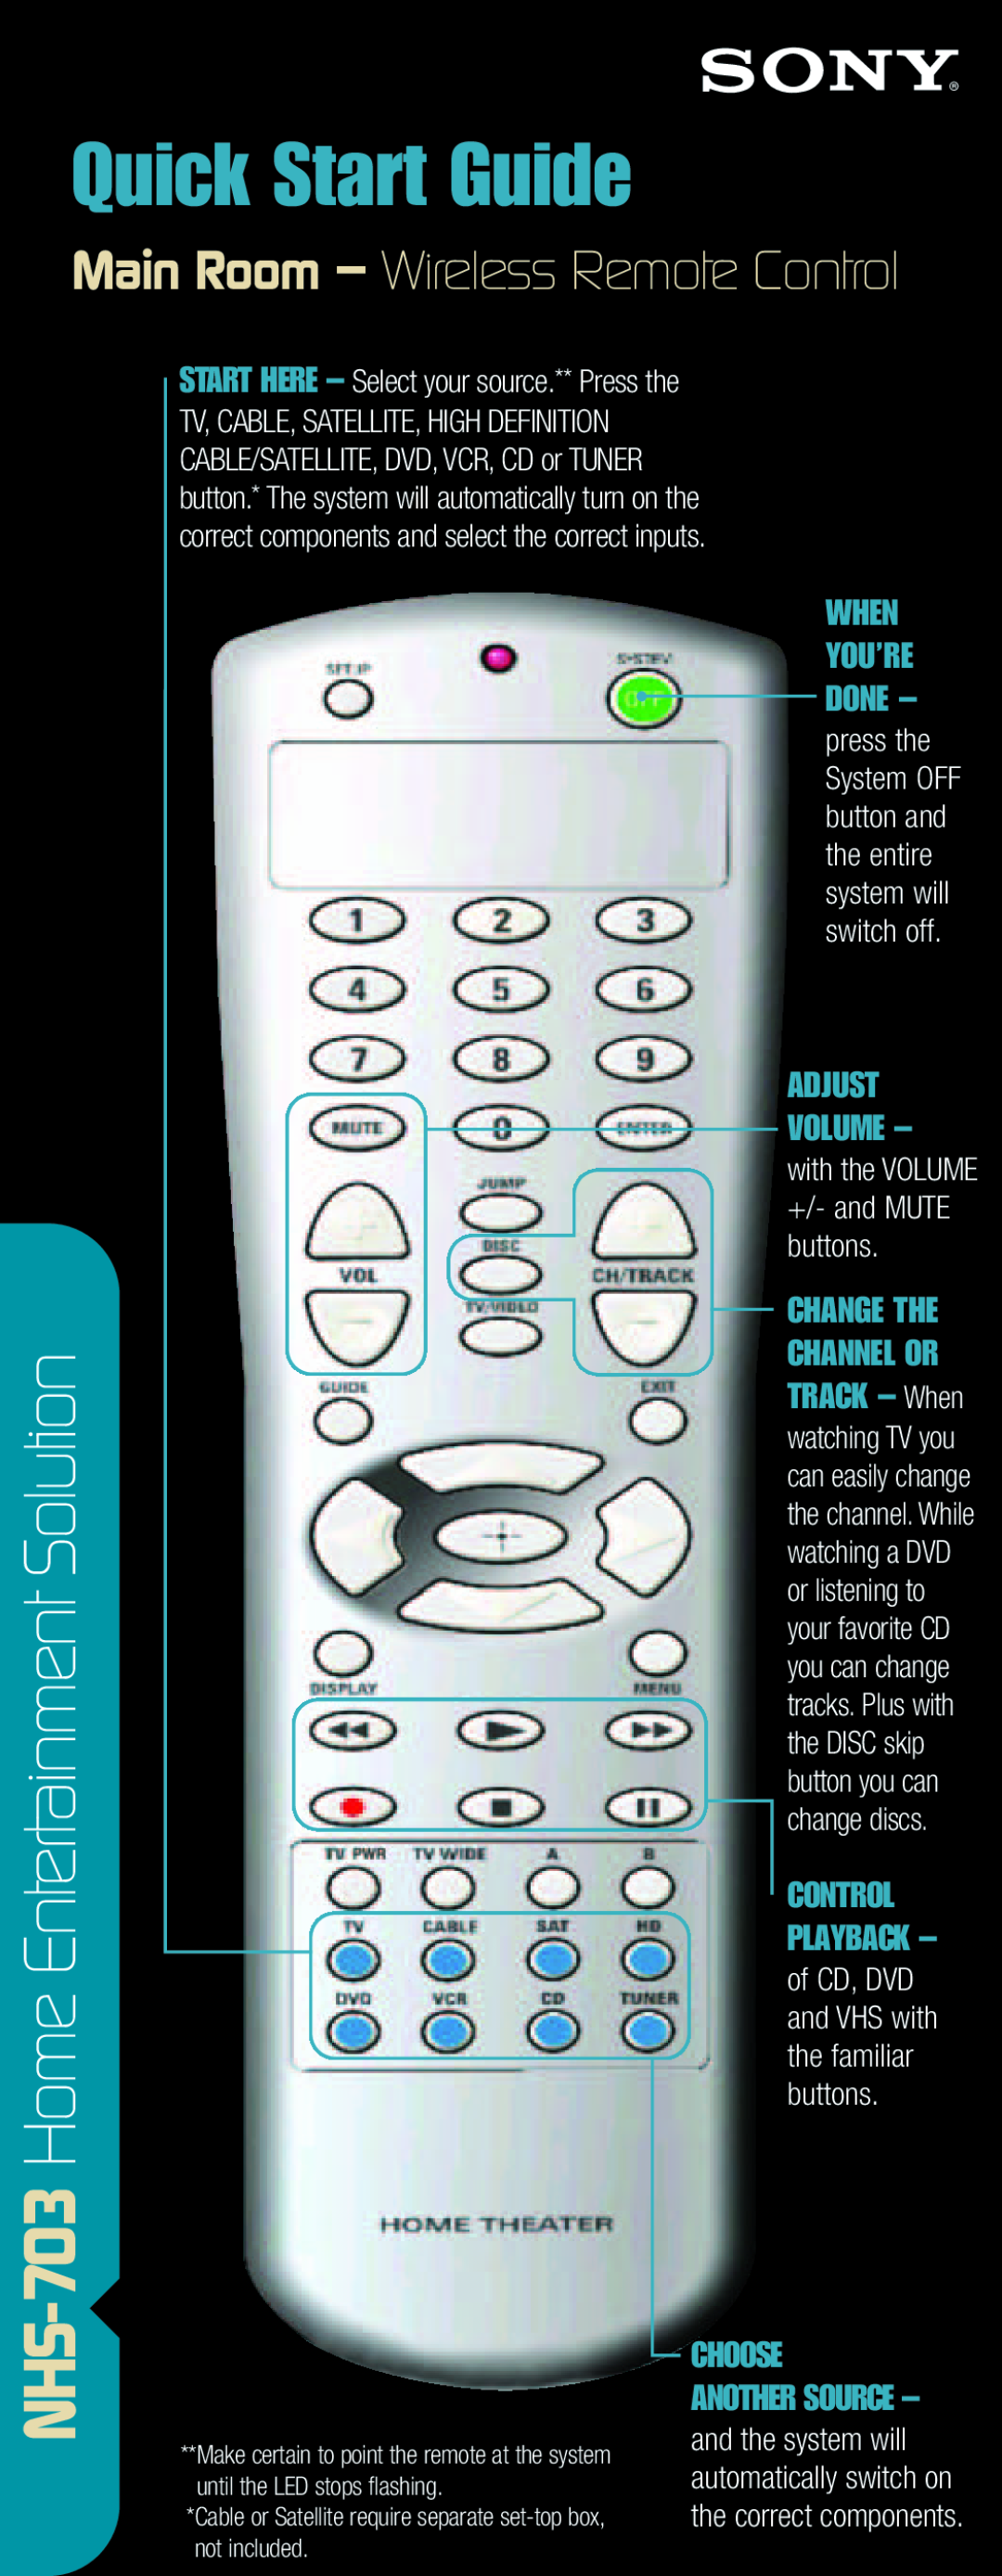 Sony quick start Quick Start Guide, NHS-703 Home Entertainment Solution, When You’Re Done, Adjust Volume 